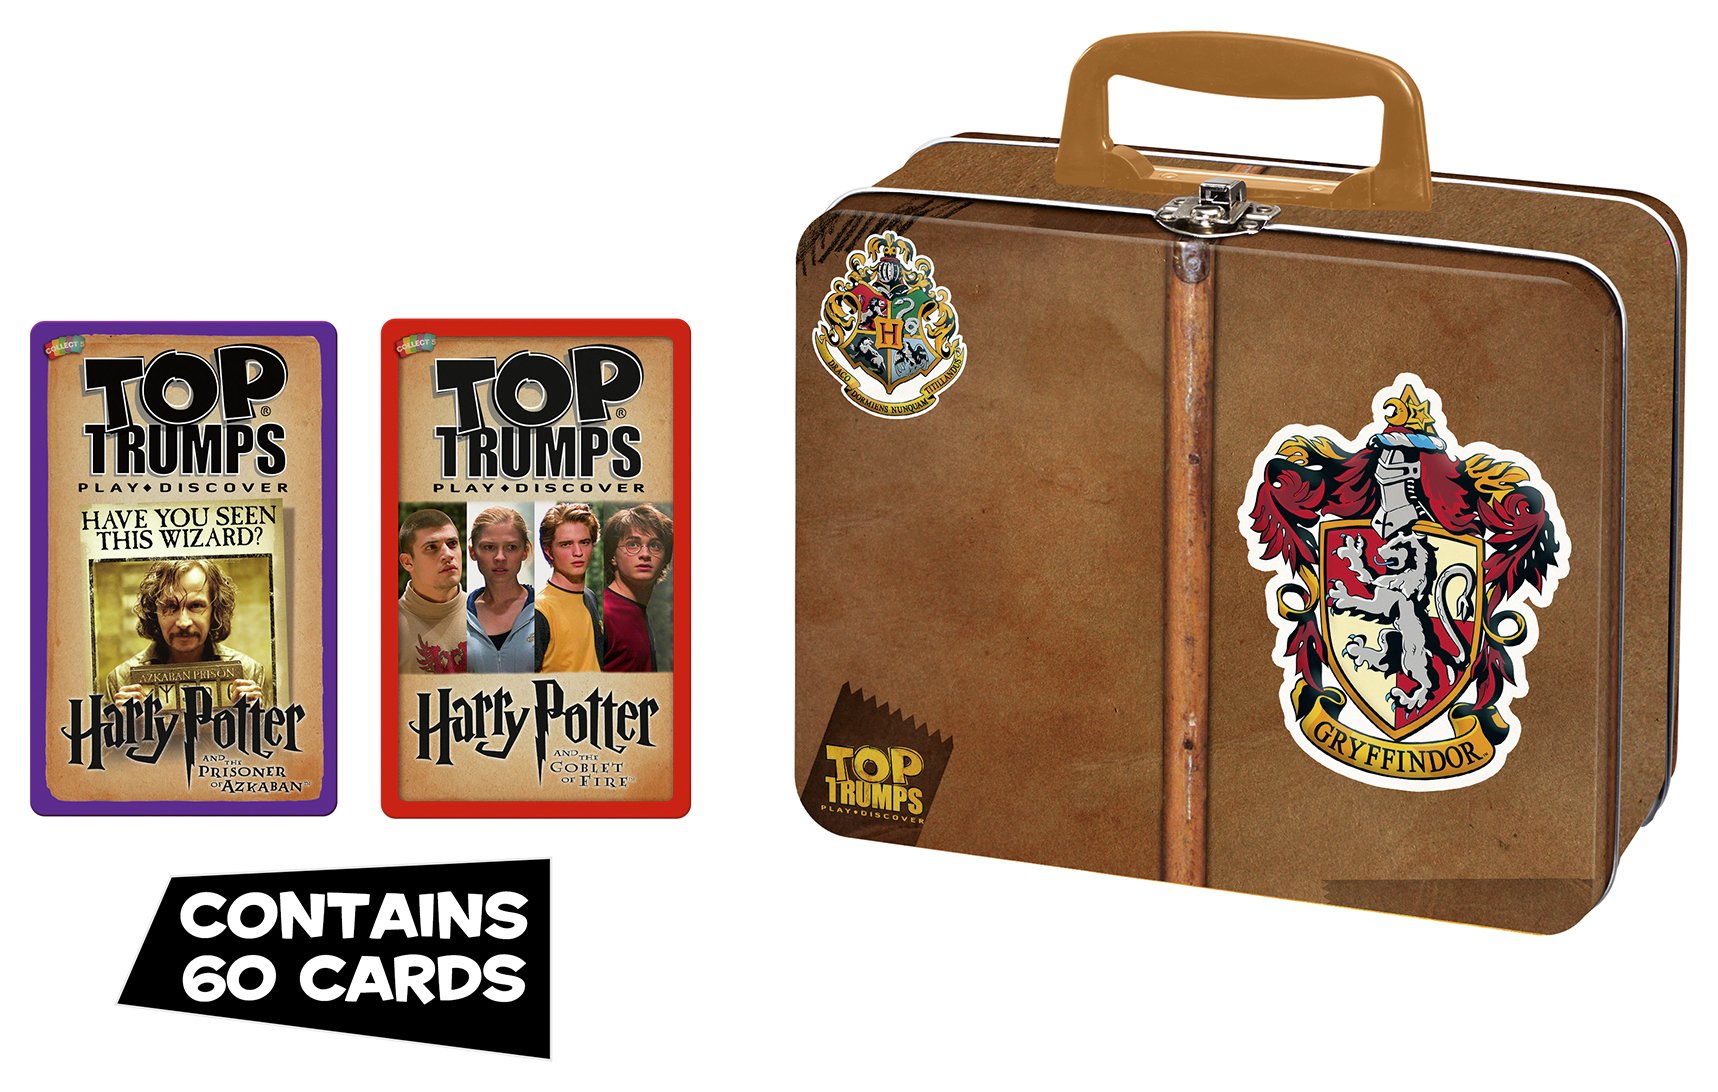 Harry Potter Gryffindor Top Trumps Collectors Tin Card Game Review